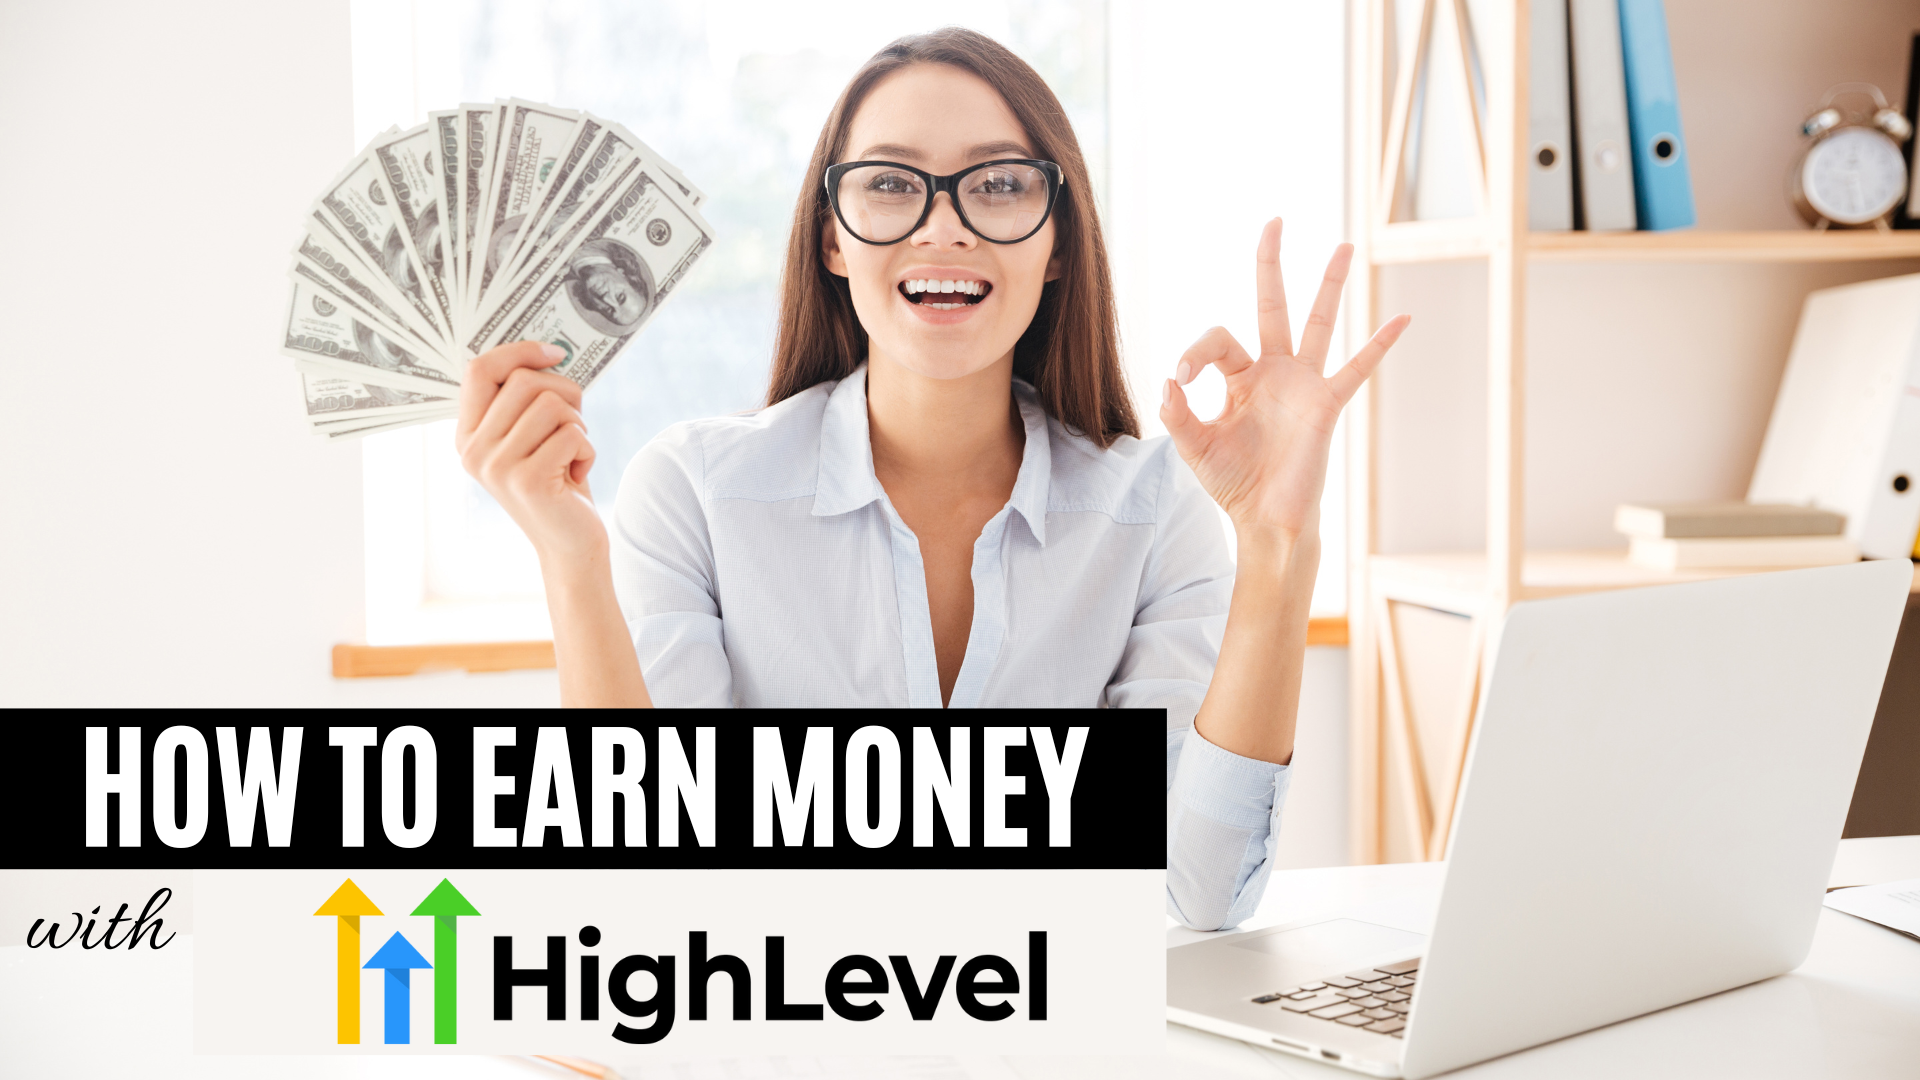 How to earn money with Gohighlevel